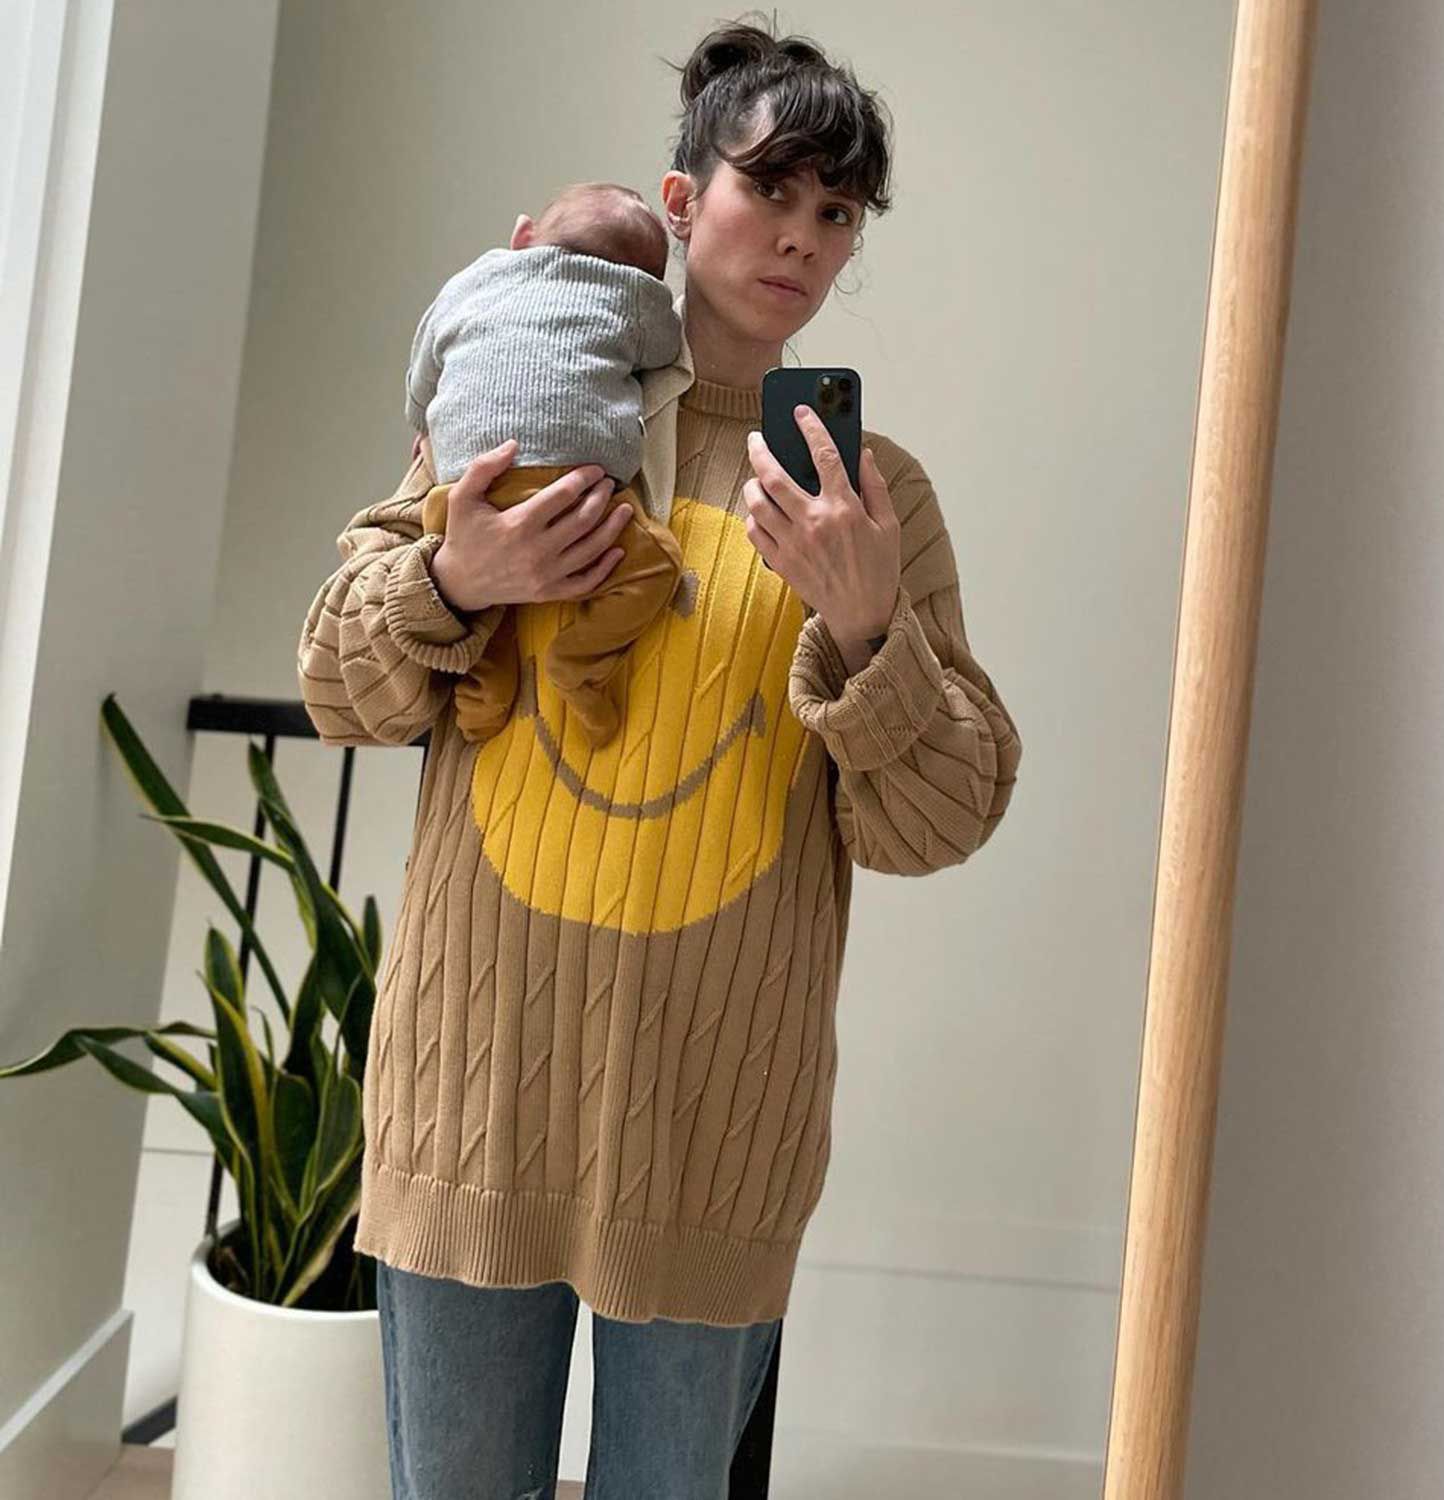 Tegan & Sara's Sara Quin Shares Photo of Her Newborn Baby While Promoting New EP With Her Twin